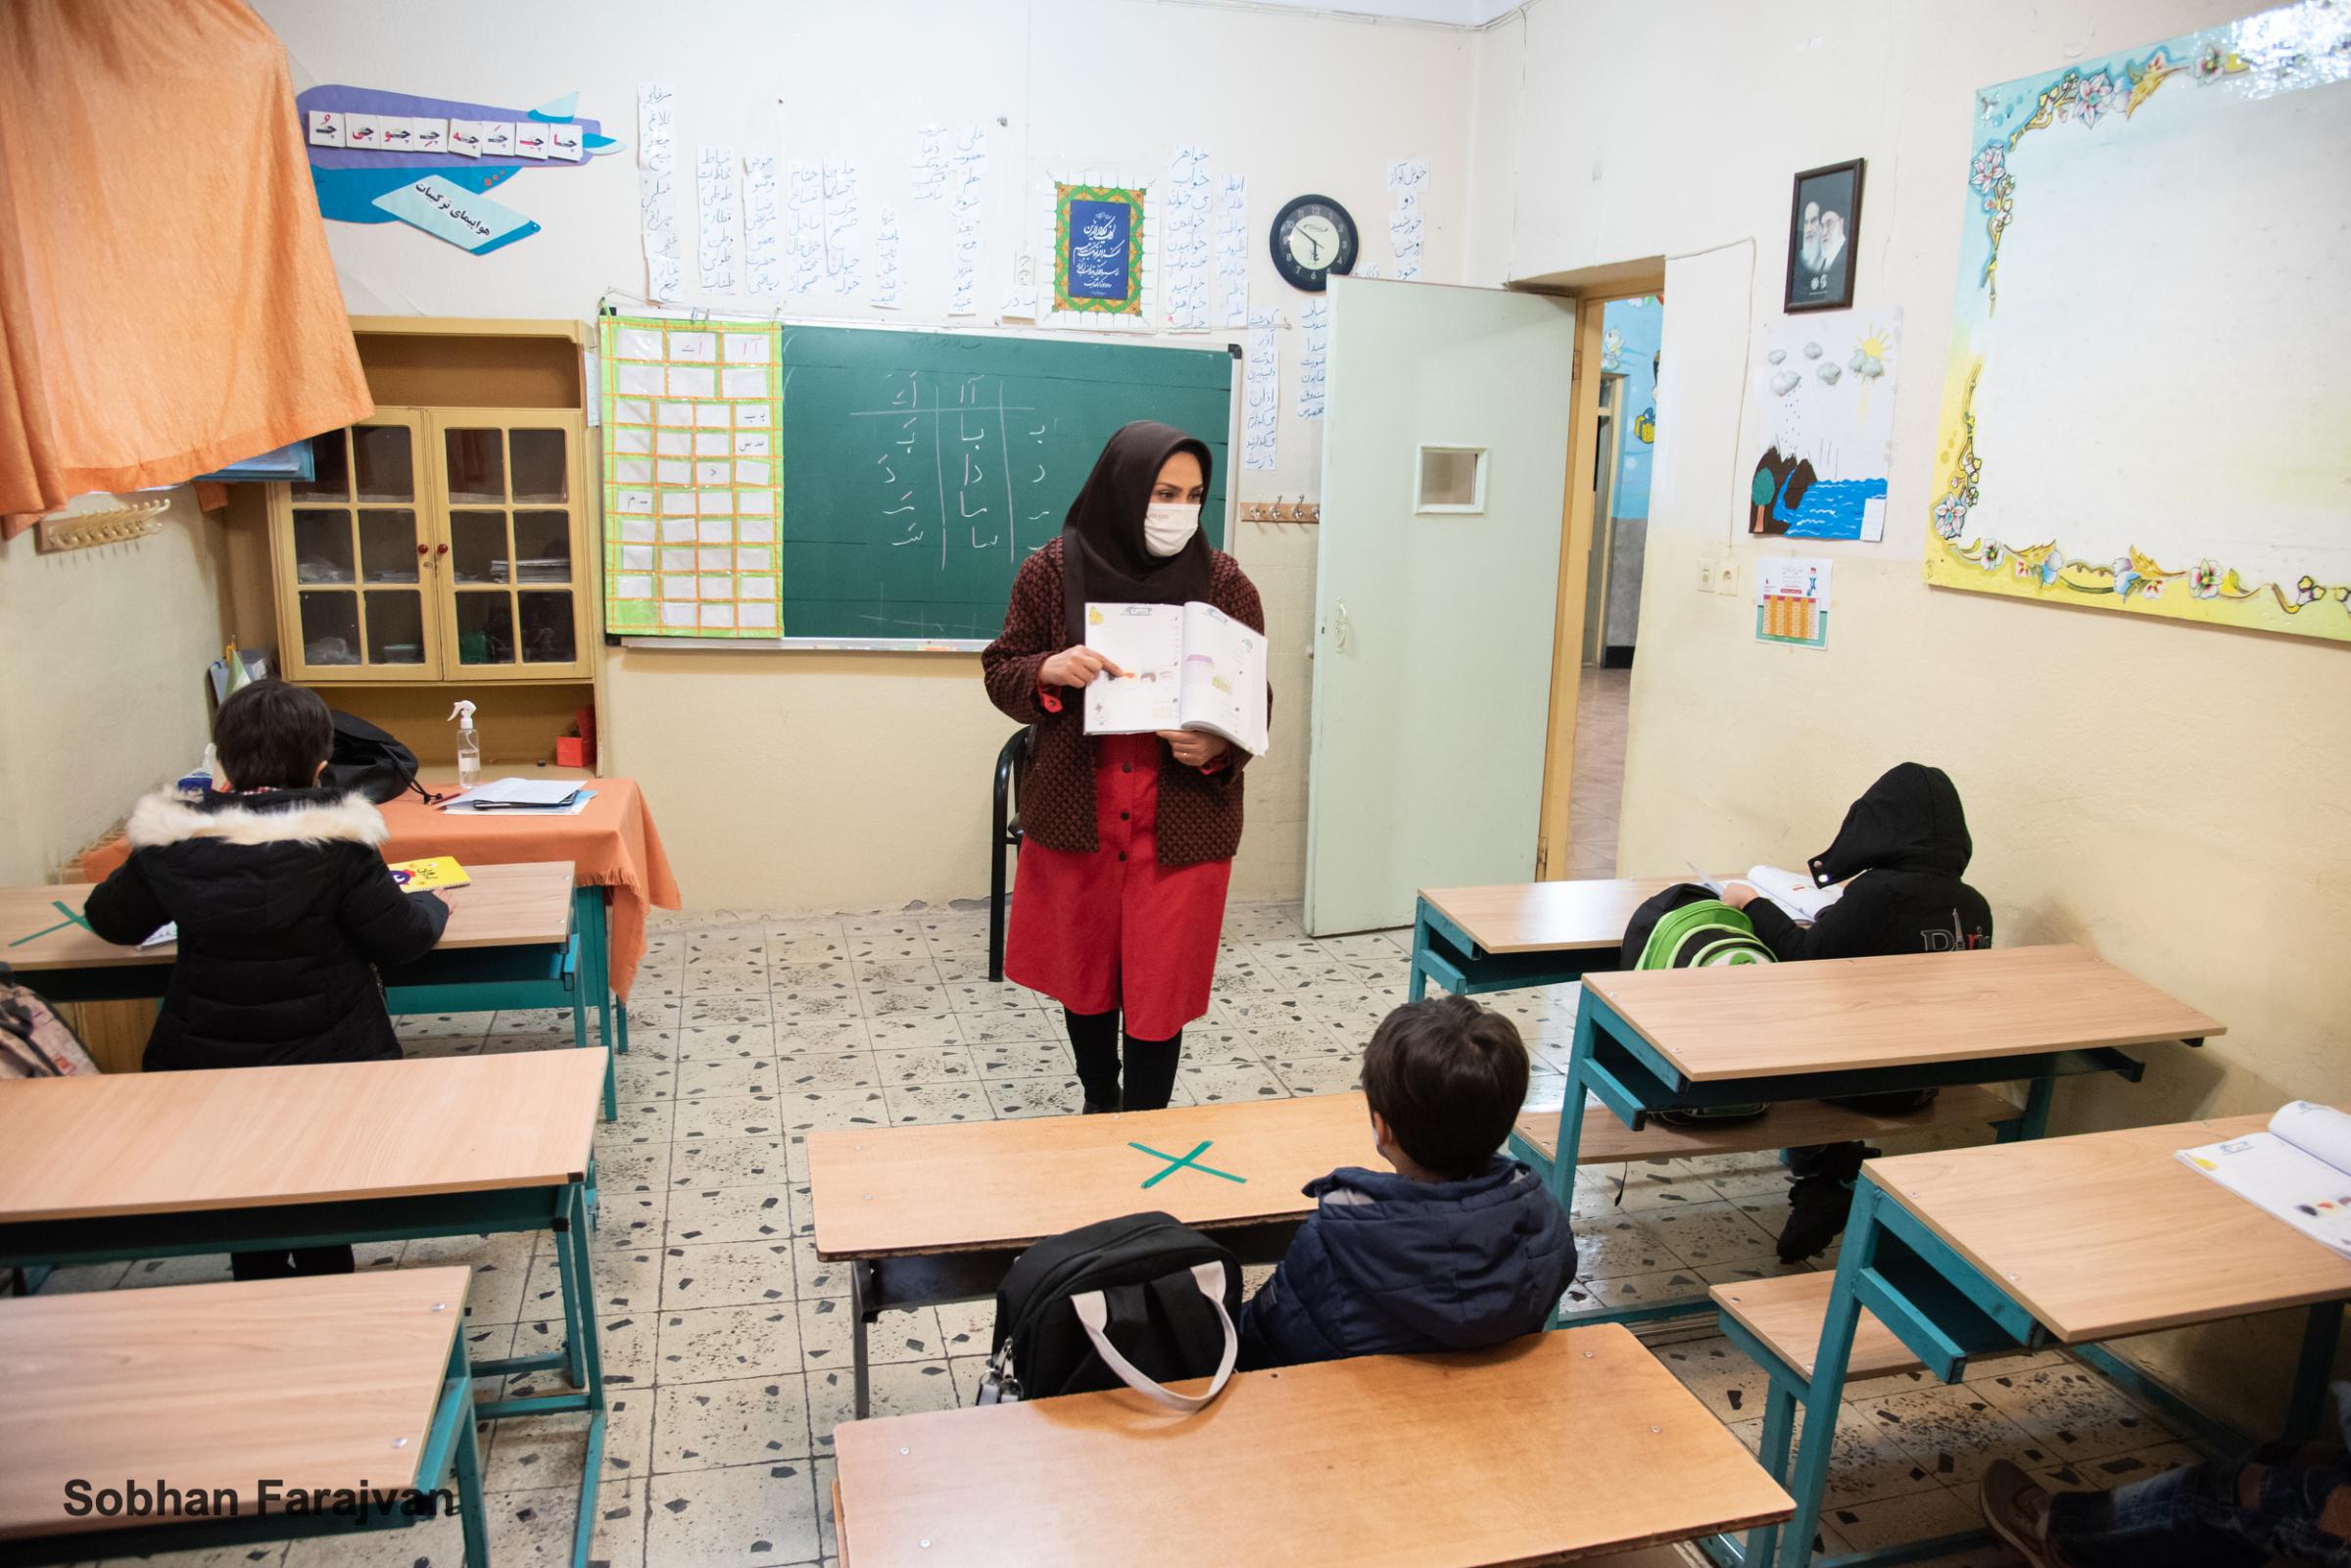 COVID-19 pandemic in Iran (2020-2022) - students wearing mask as a precaution amid the spread of...